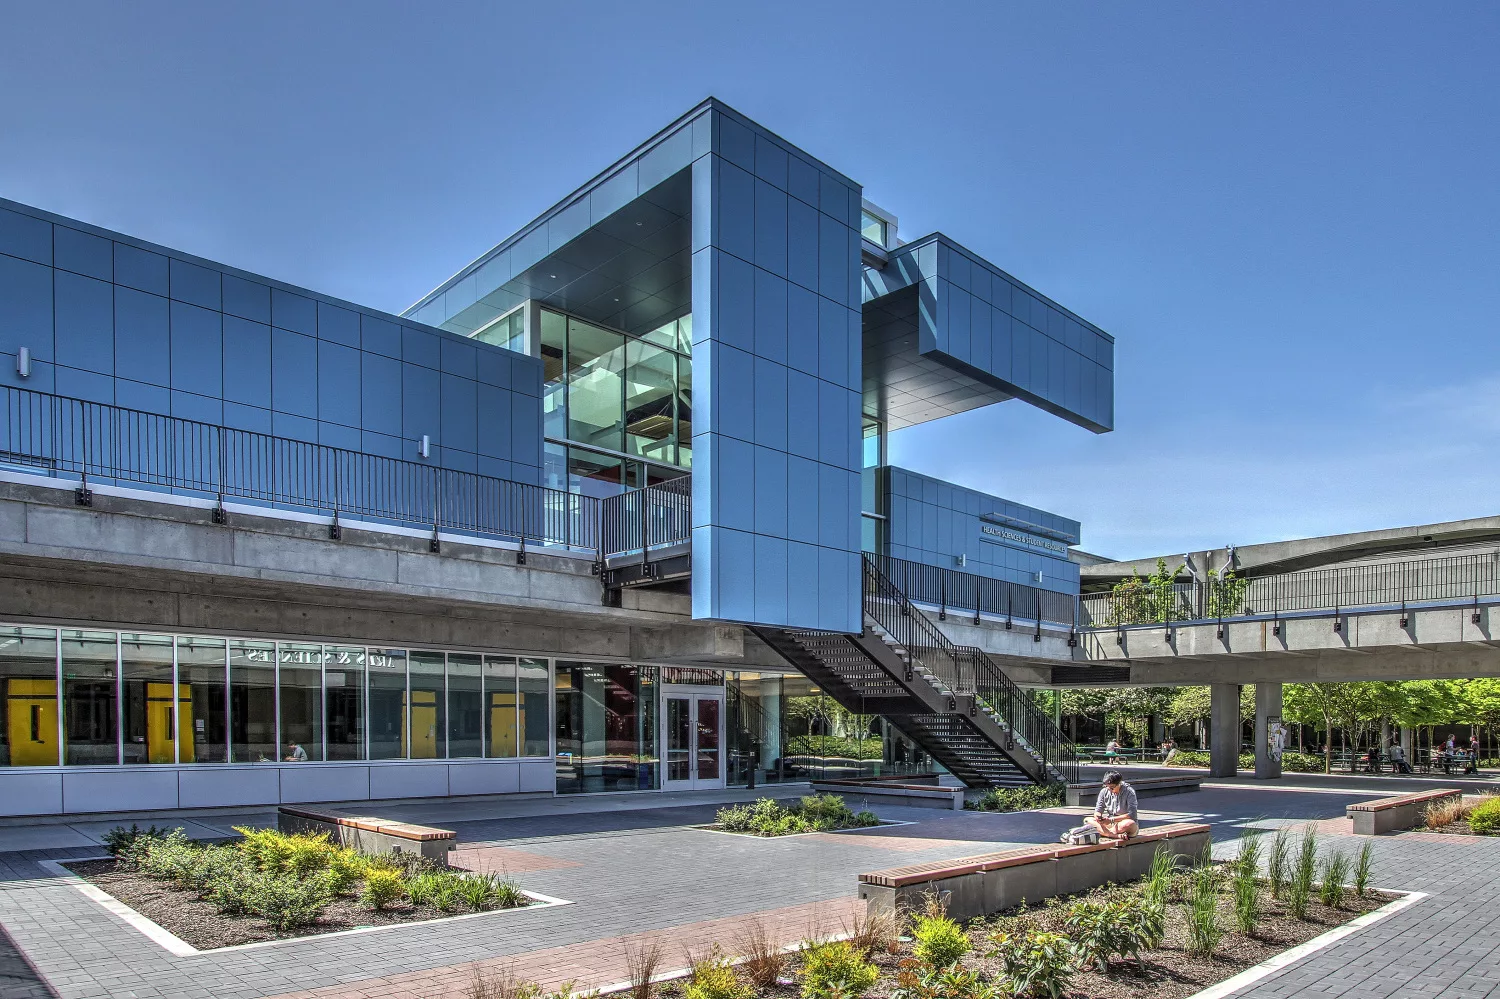 Exterior daylight view of North Seattle College's Health Sciences and Student Resources Building featuring an outdoor plaza with landscaping and benches, a staircase, and elevated walkways for visitors